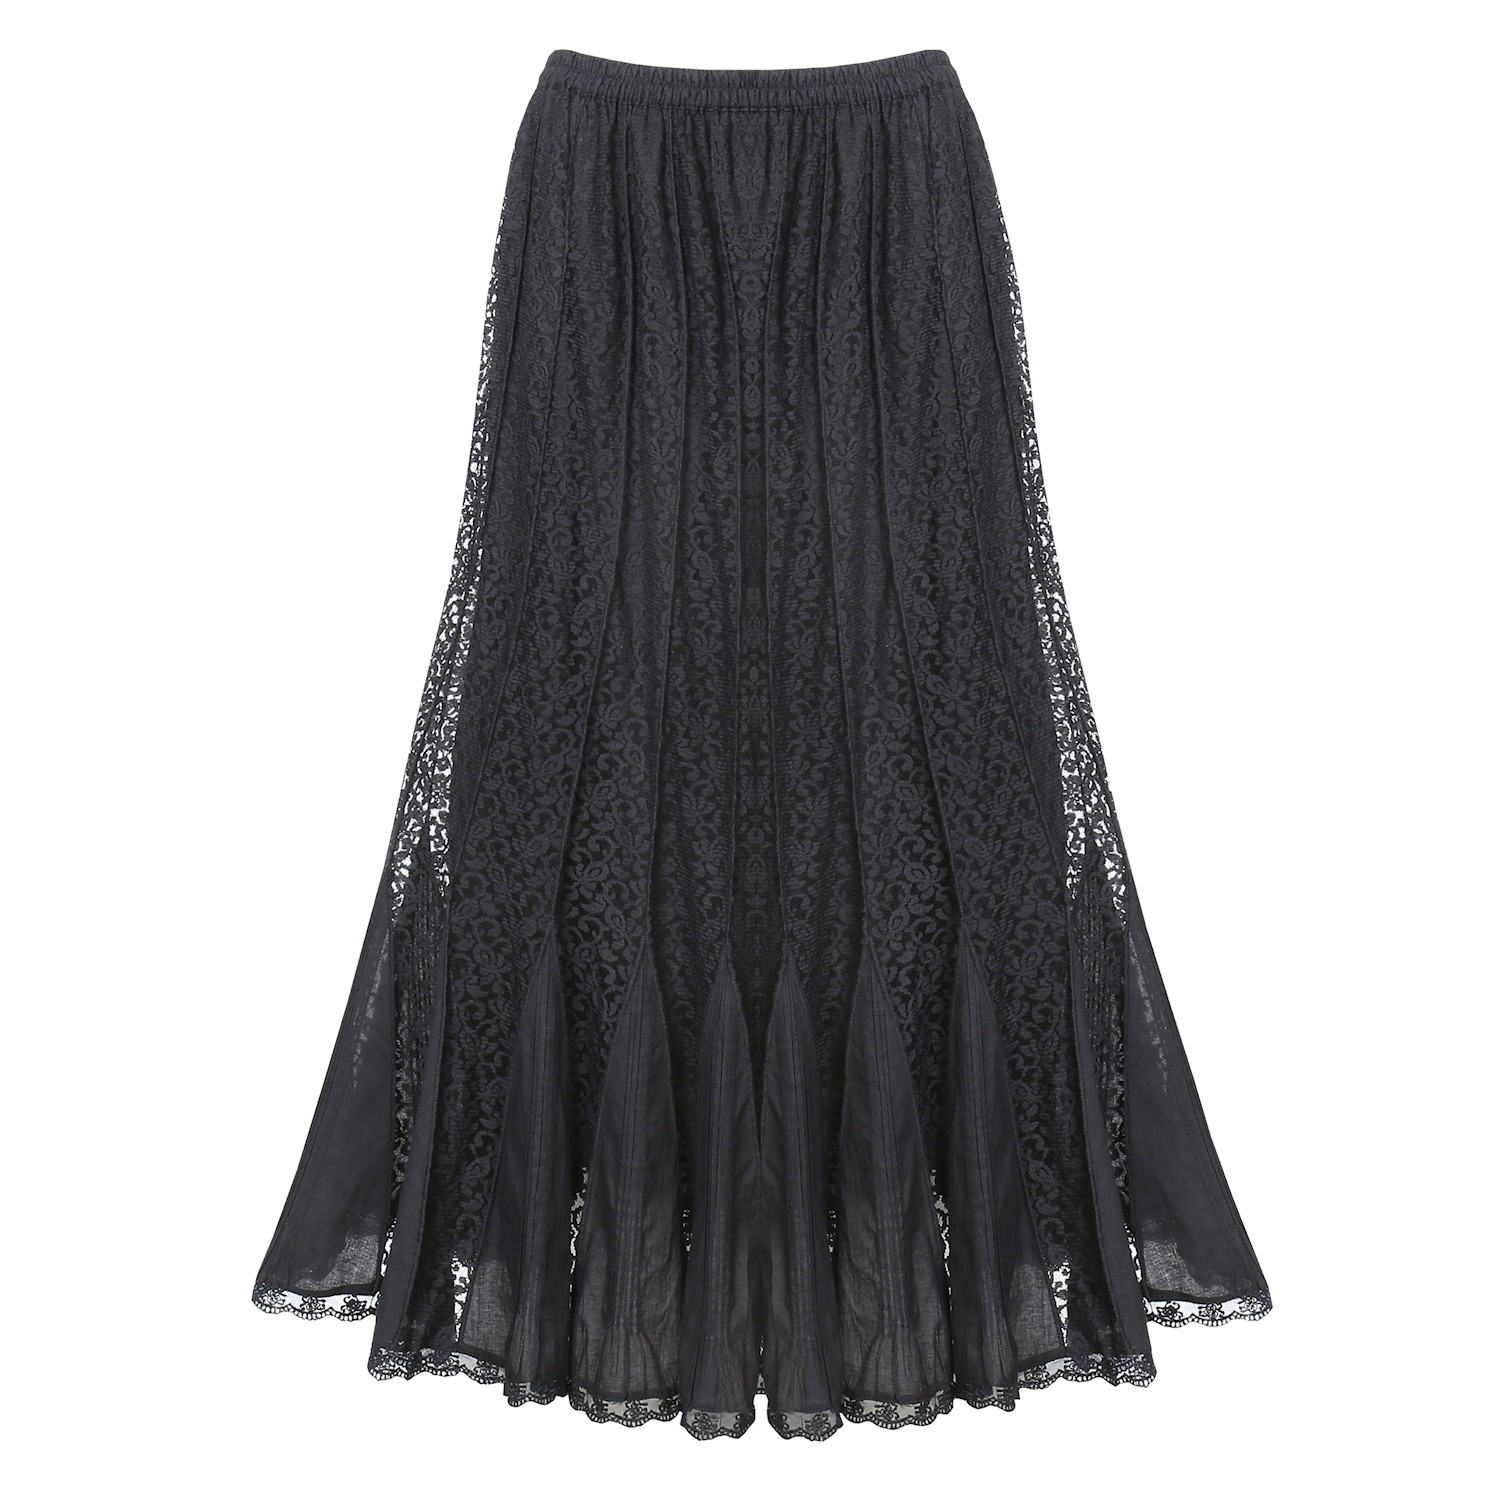 Women's Black Lace Gored Skirt - Fully Lined | Signals | TA4602